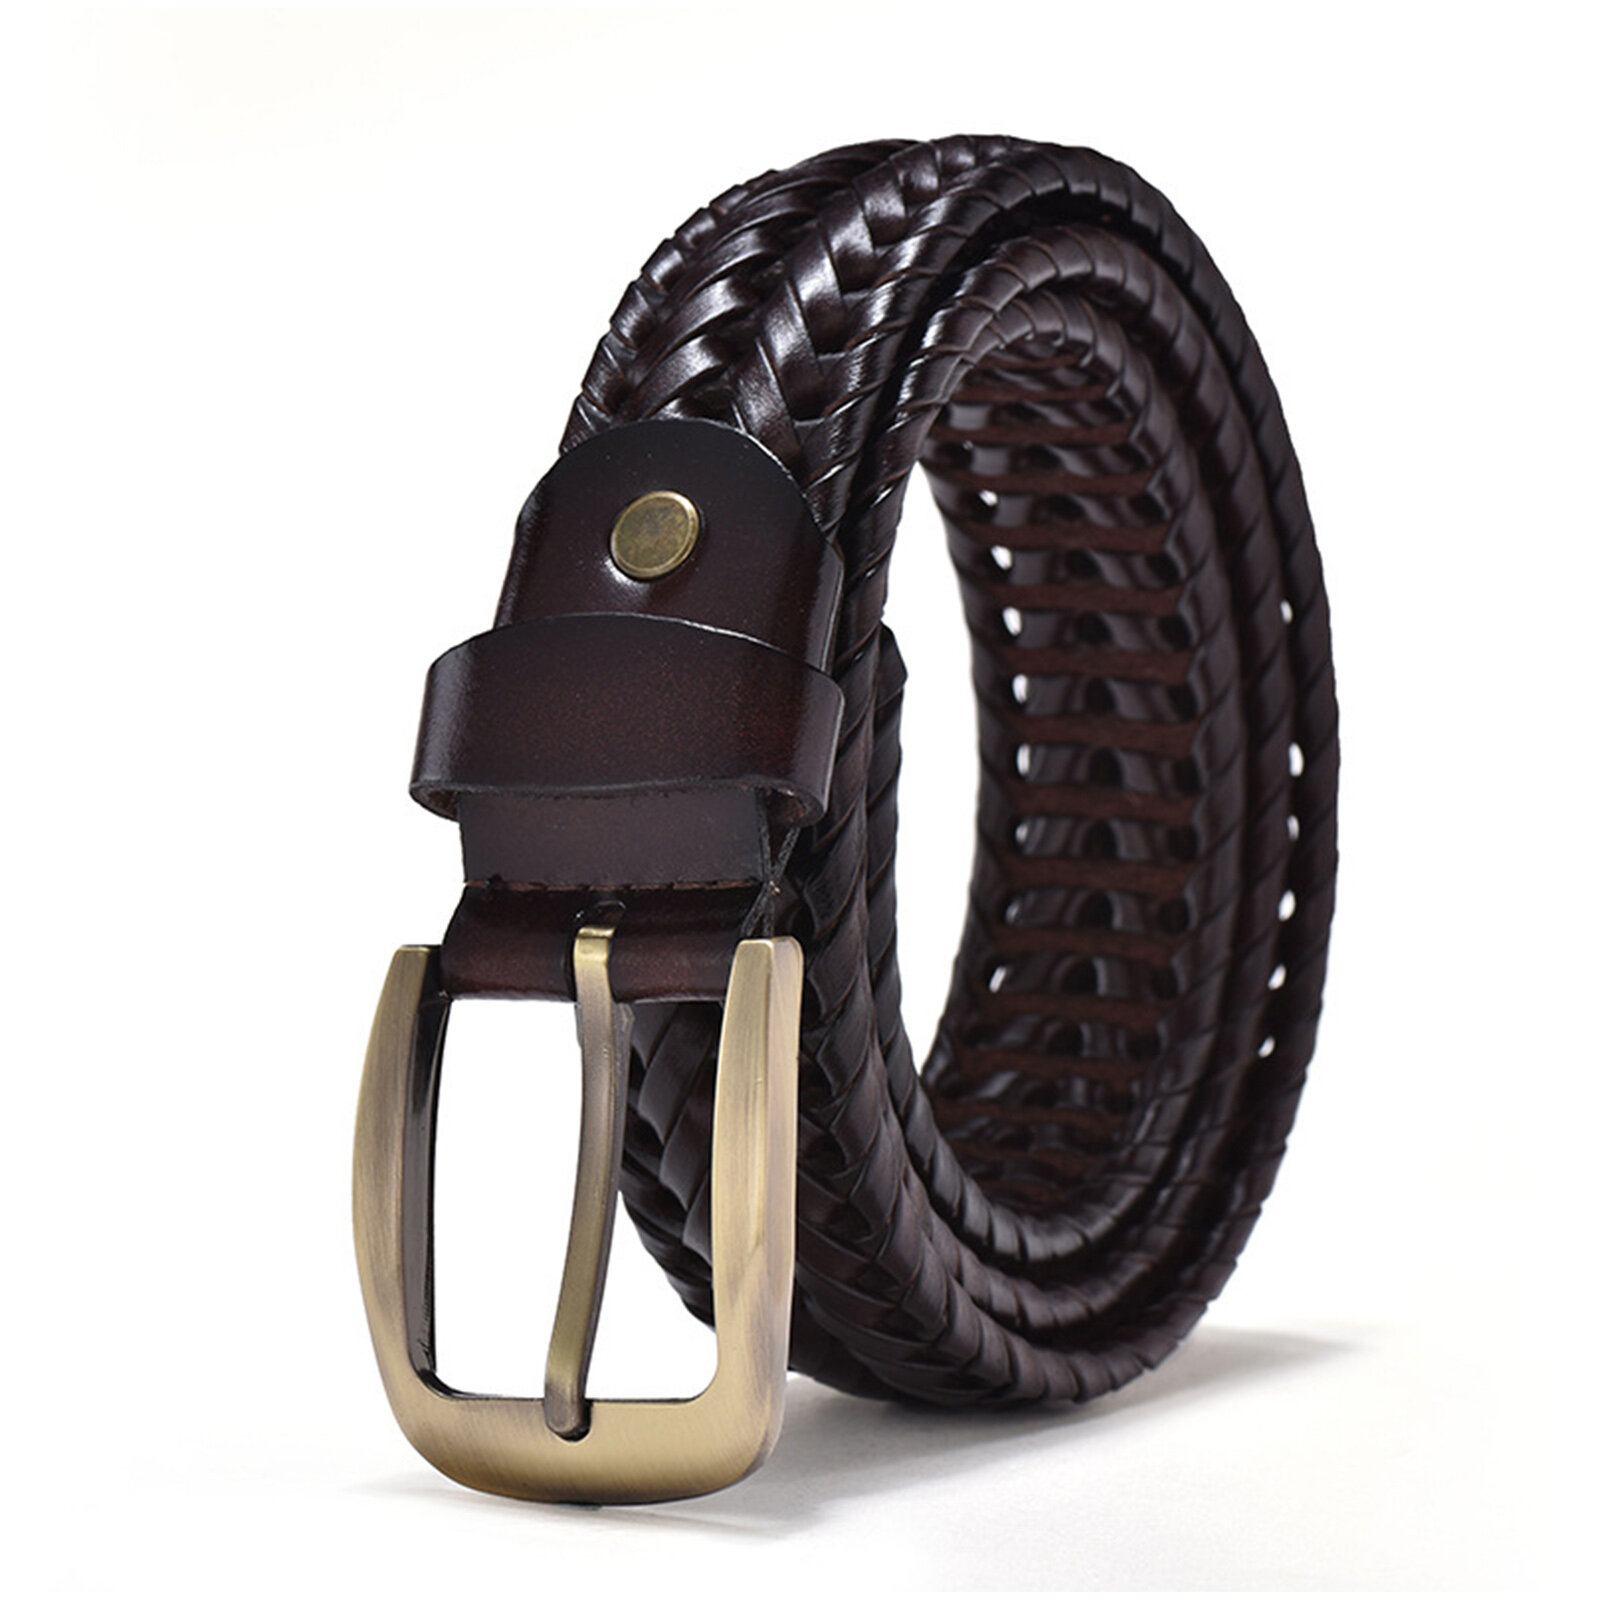 JASSY 105-125cm Breathable Men's Leather Handwoven Vintage Casual Pin Buckle Hollow Belt